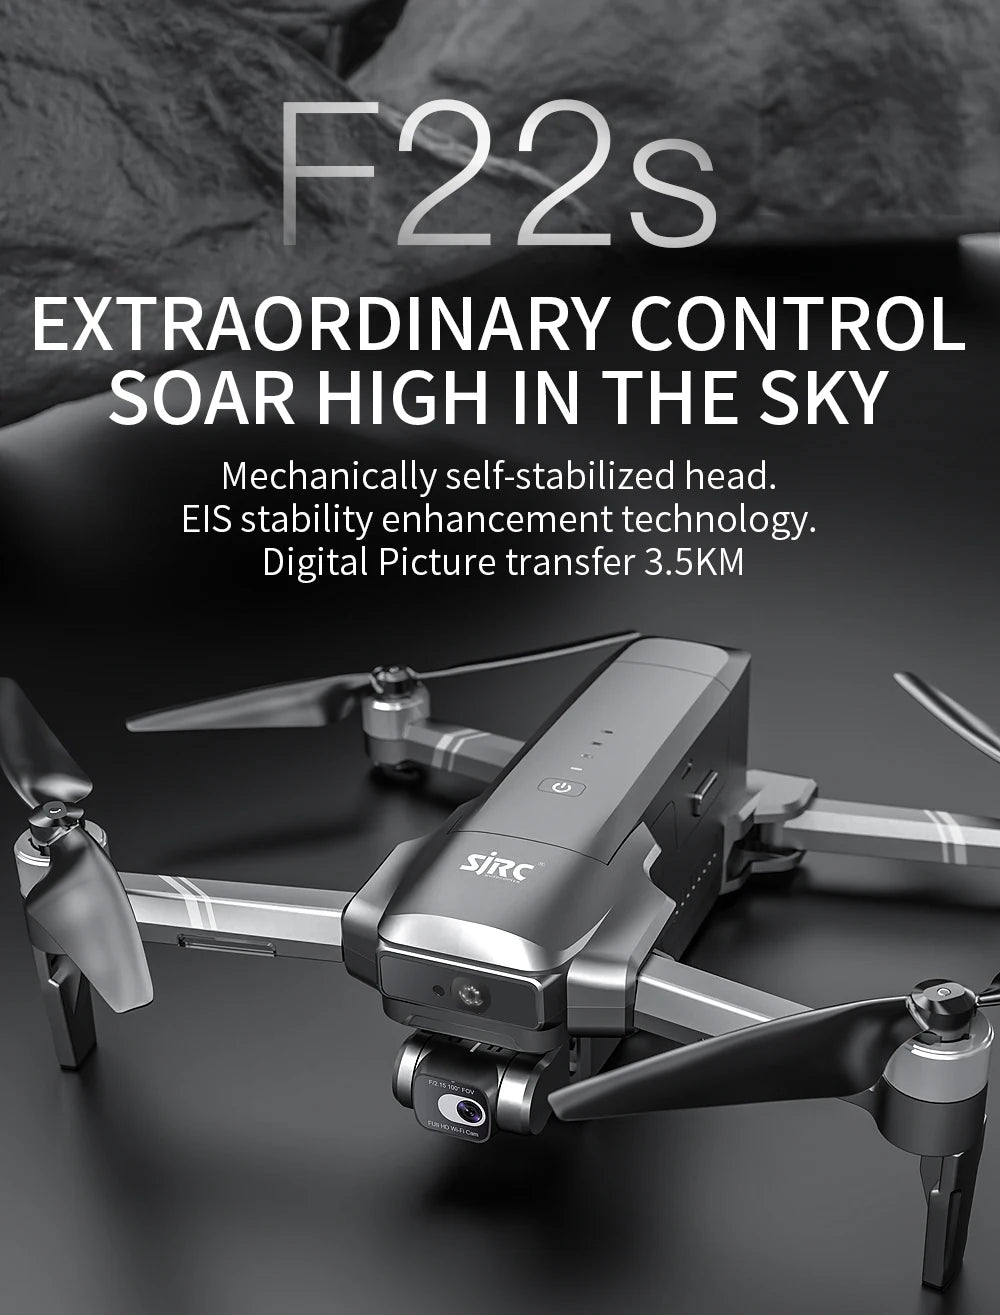 SJRC F22S Drone, F2Zs EXTRAORDINARY CONTROL SOAR HIGH IN THE